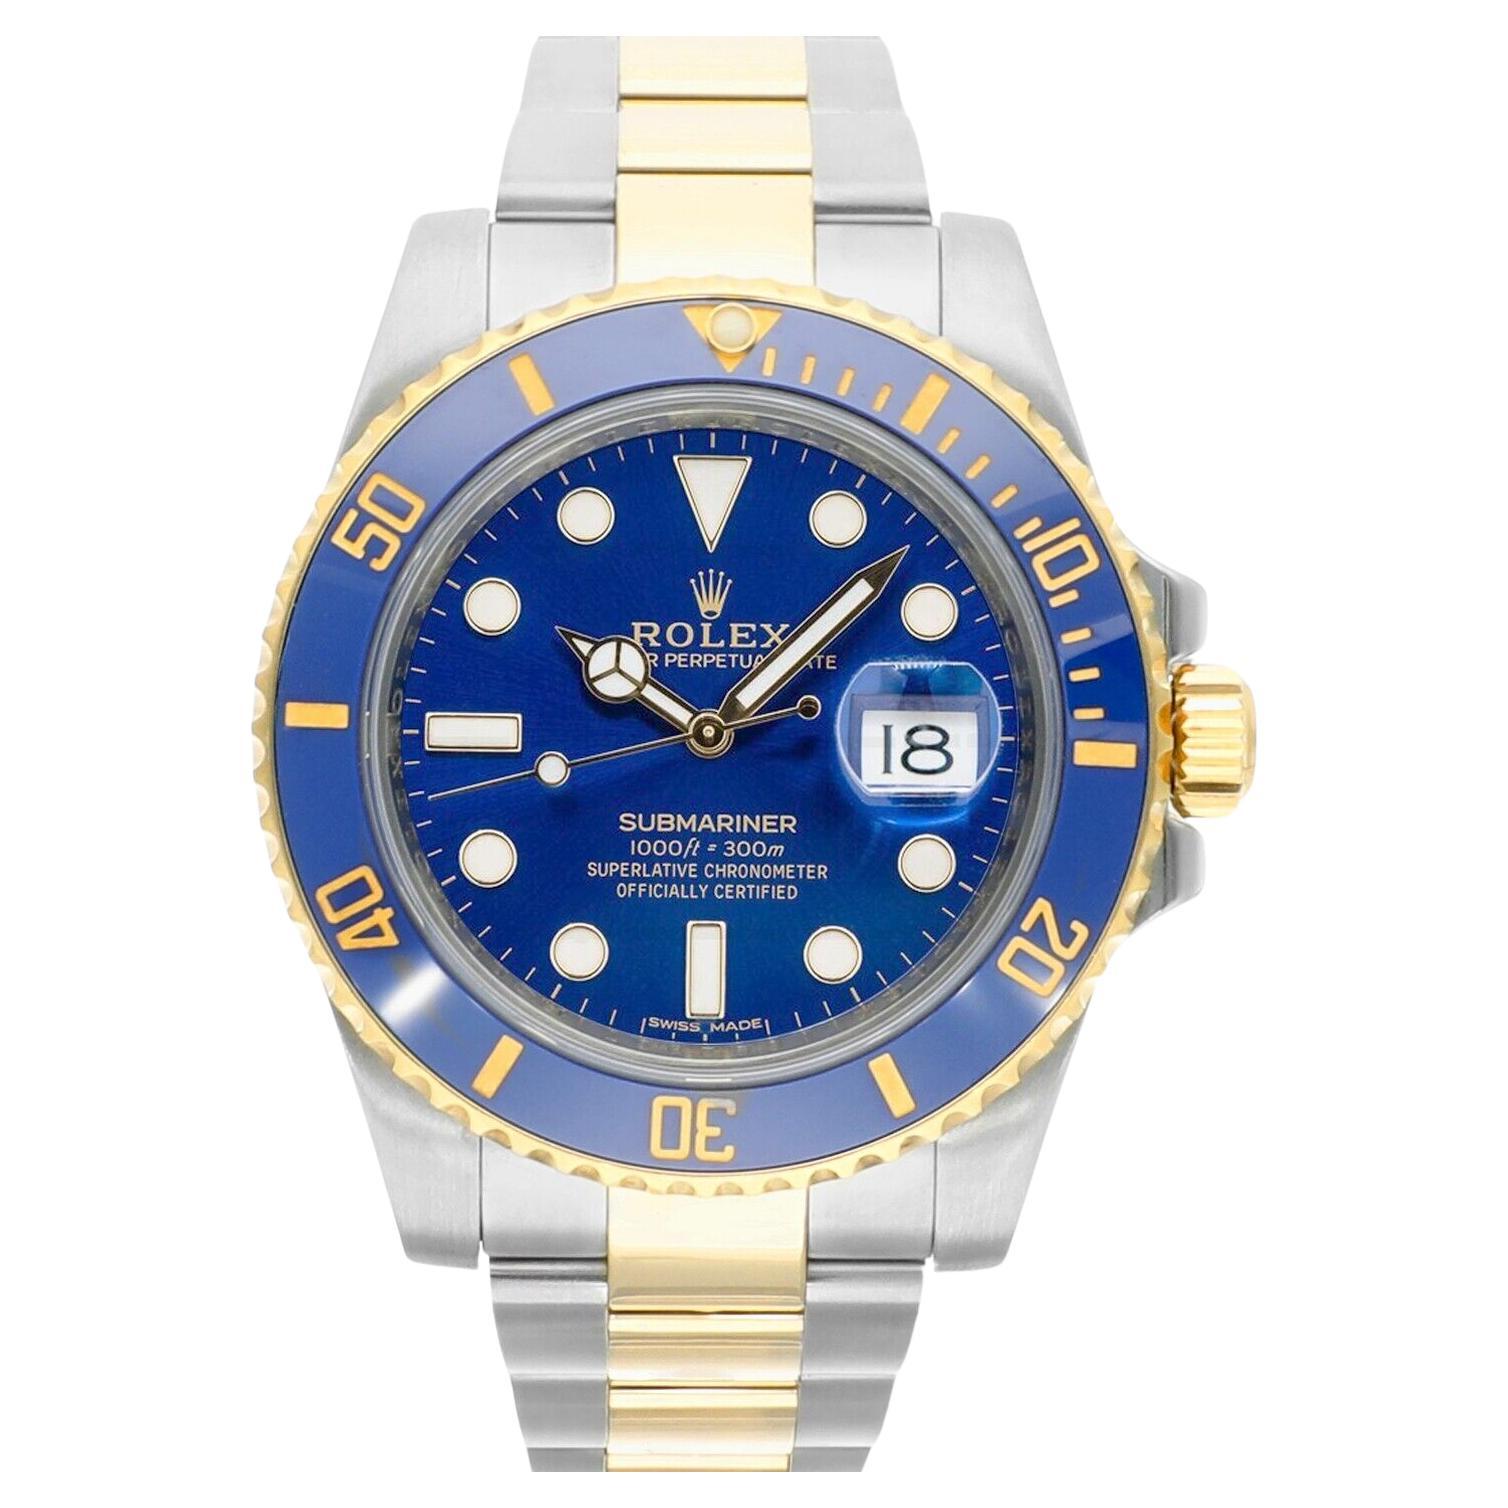 Rolex Submariner Date 116613LB Ceramic Bezel Yellow Gold/Stainless Steel Watch For Sale